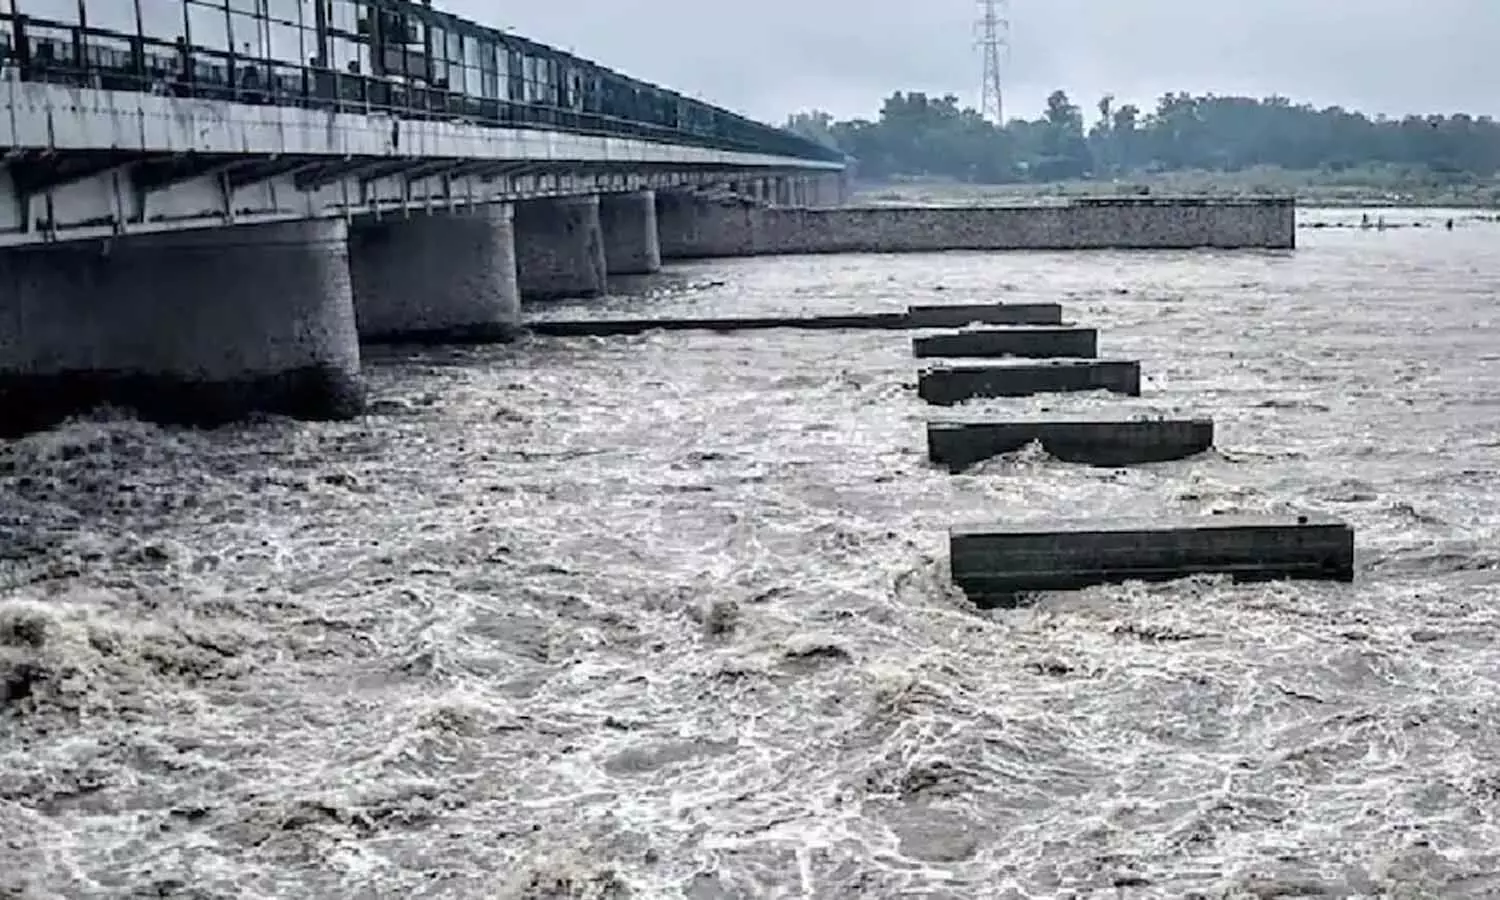 Children Drowned in Yamuna River